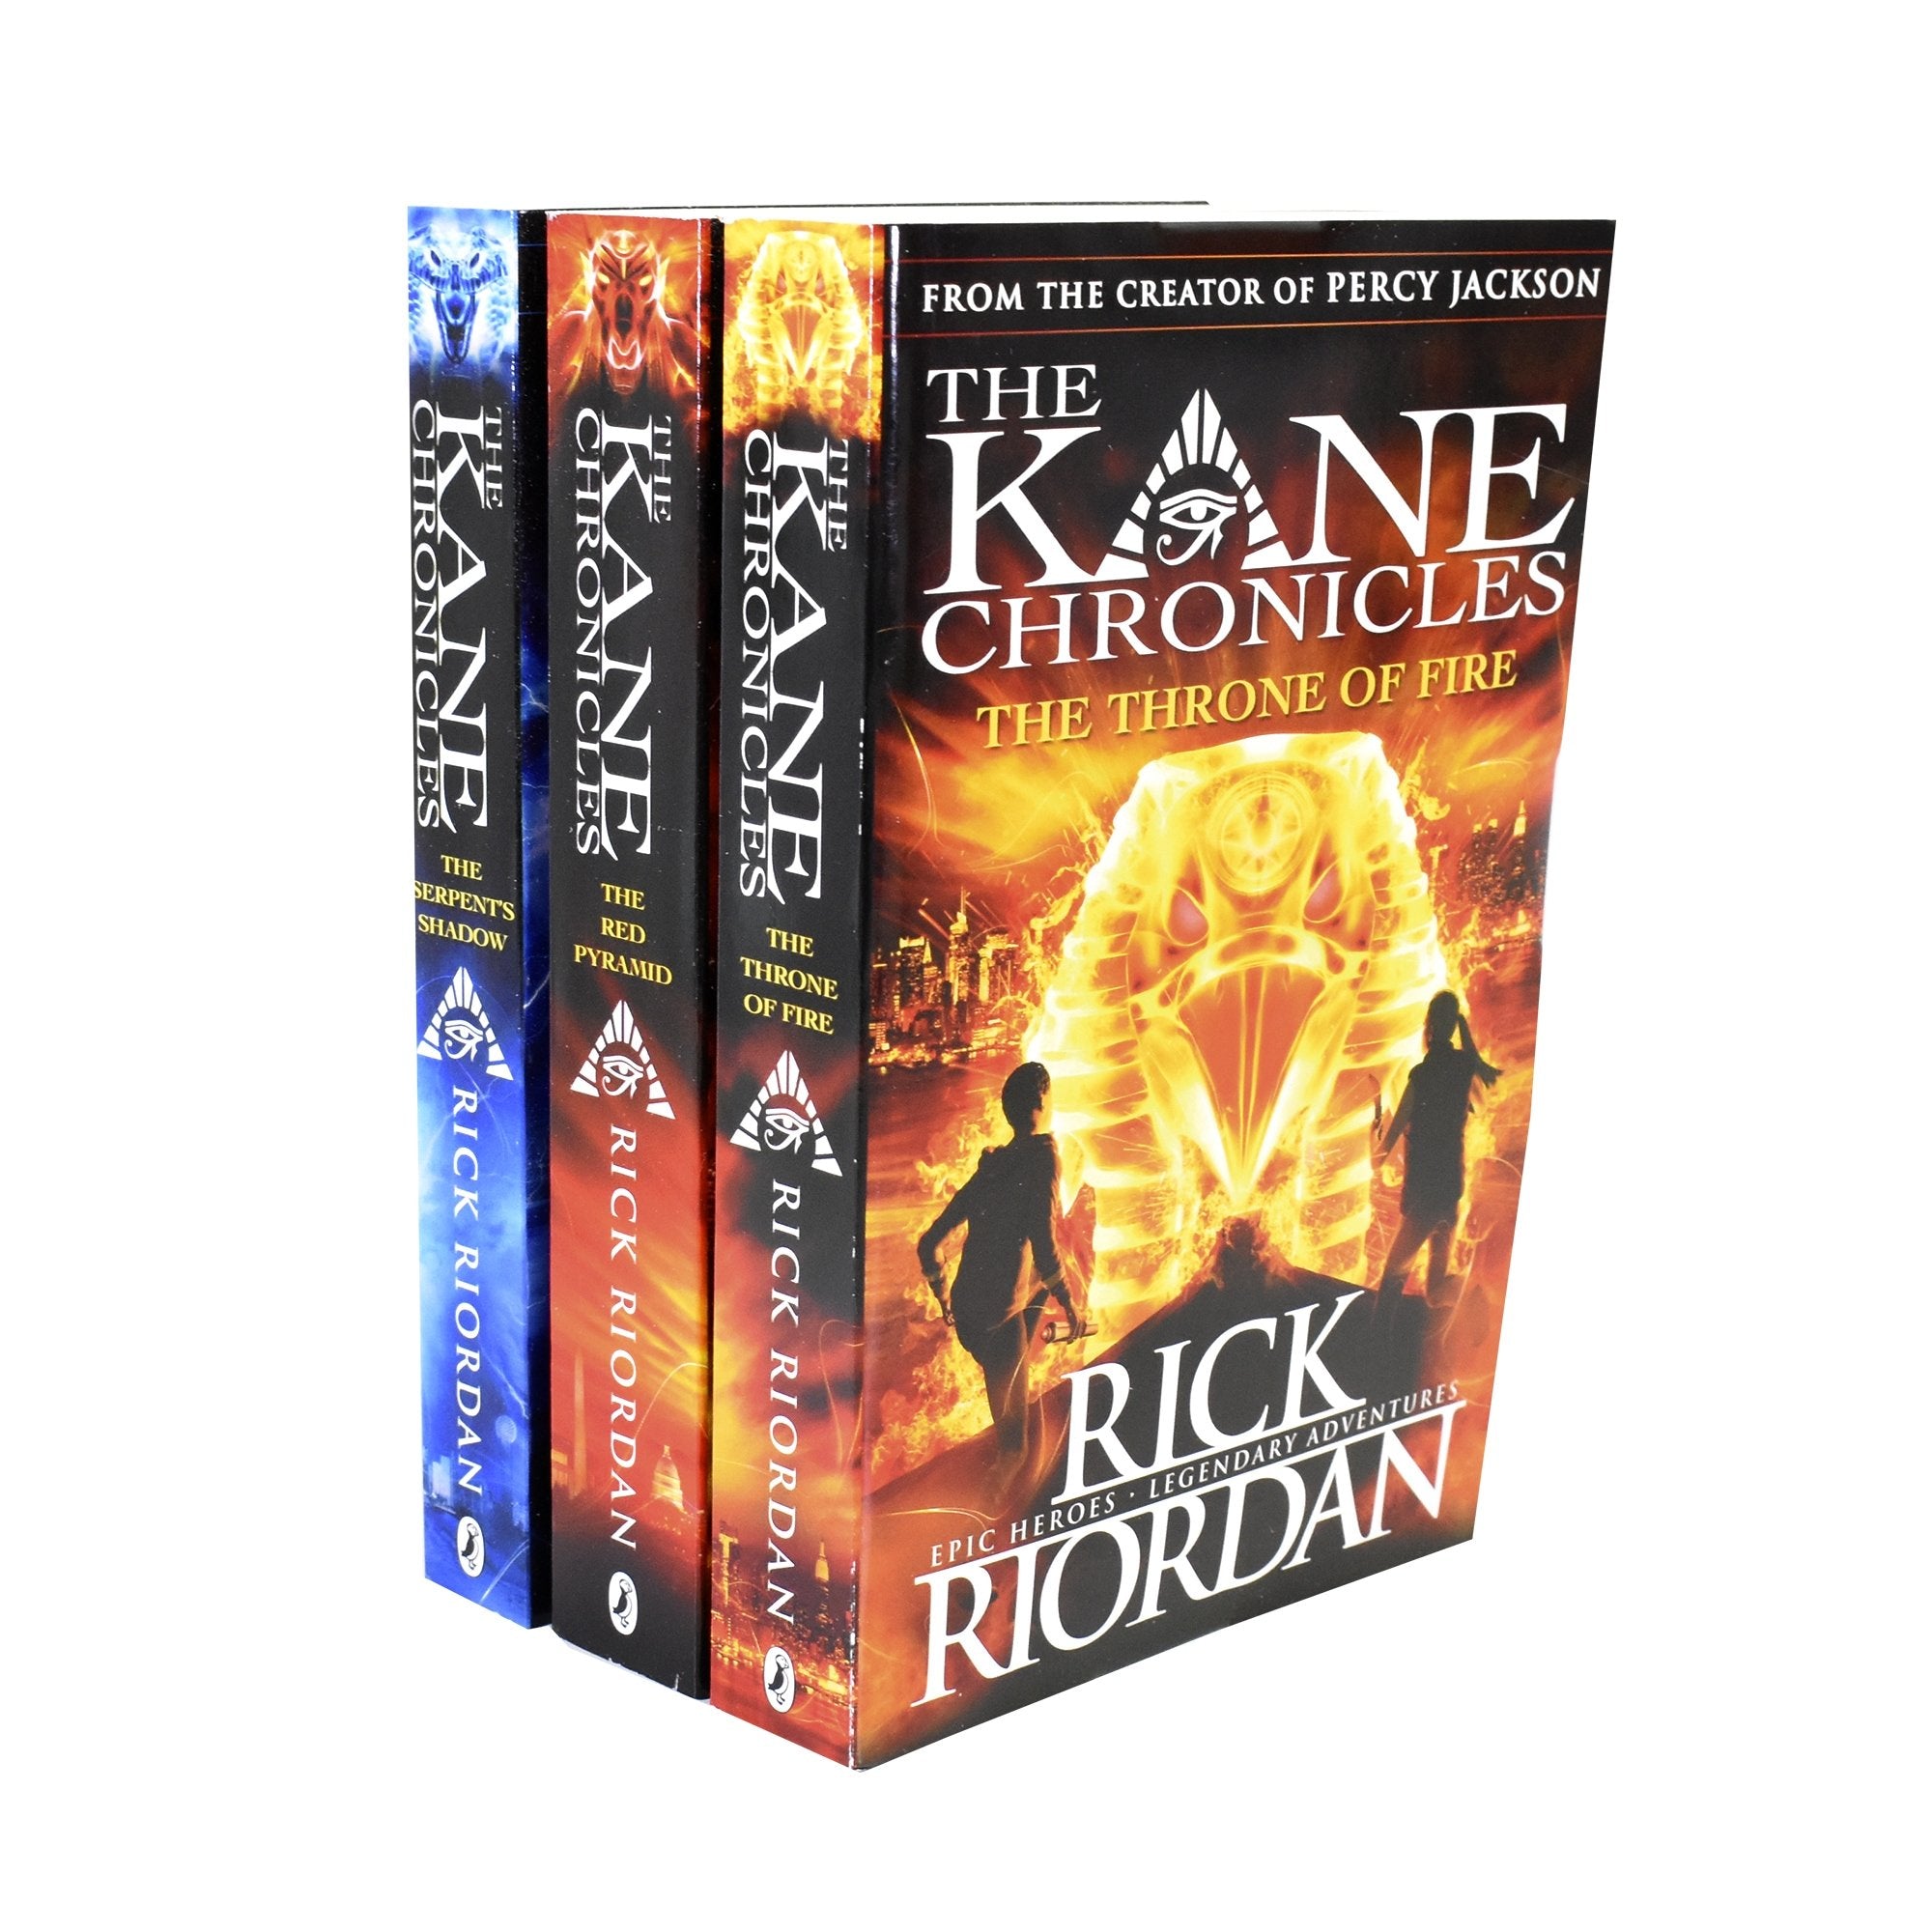 Kane Chronicles 3 Books Young Adult Collection Paperback Set By Rick Riordan - St Stephens Books